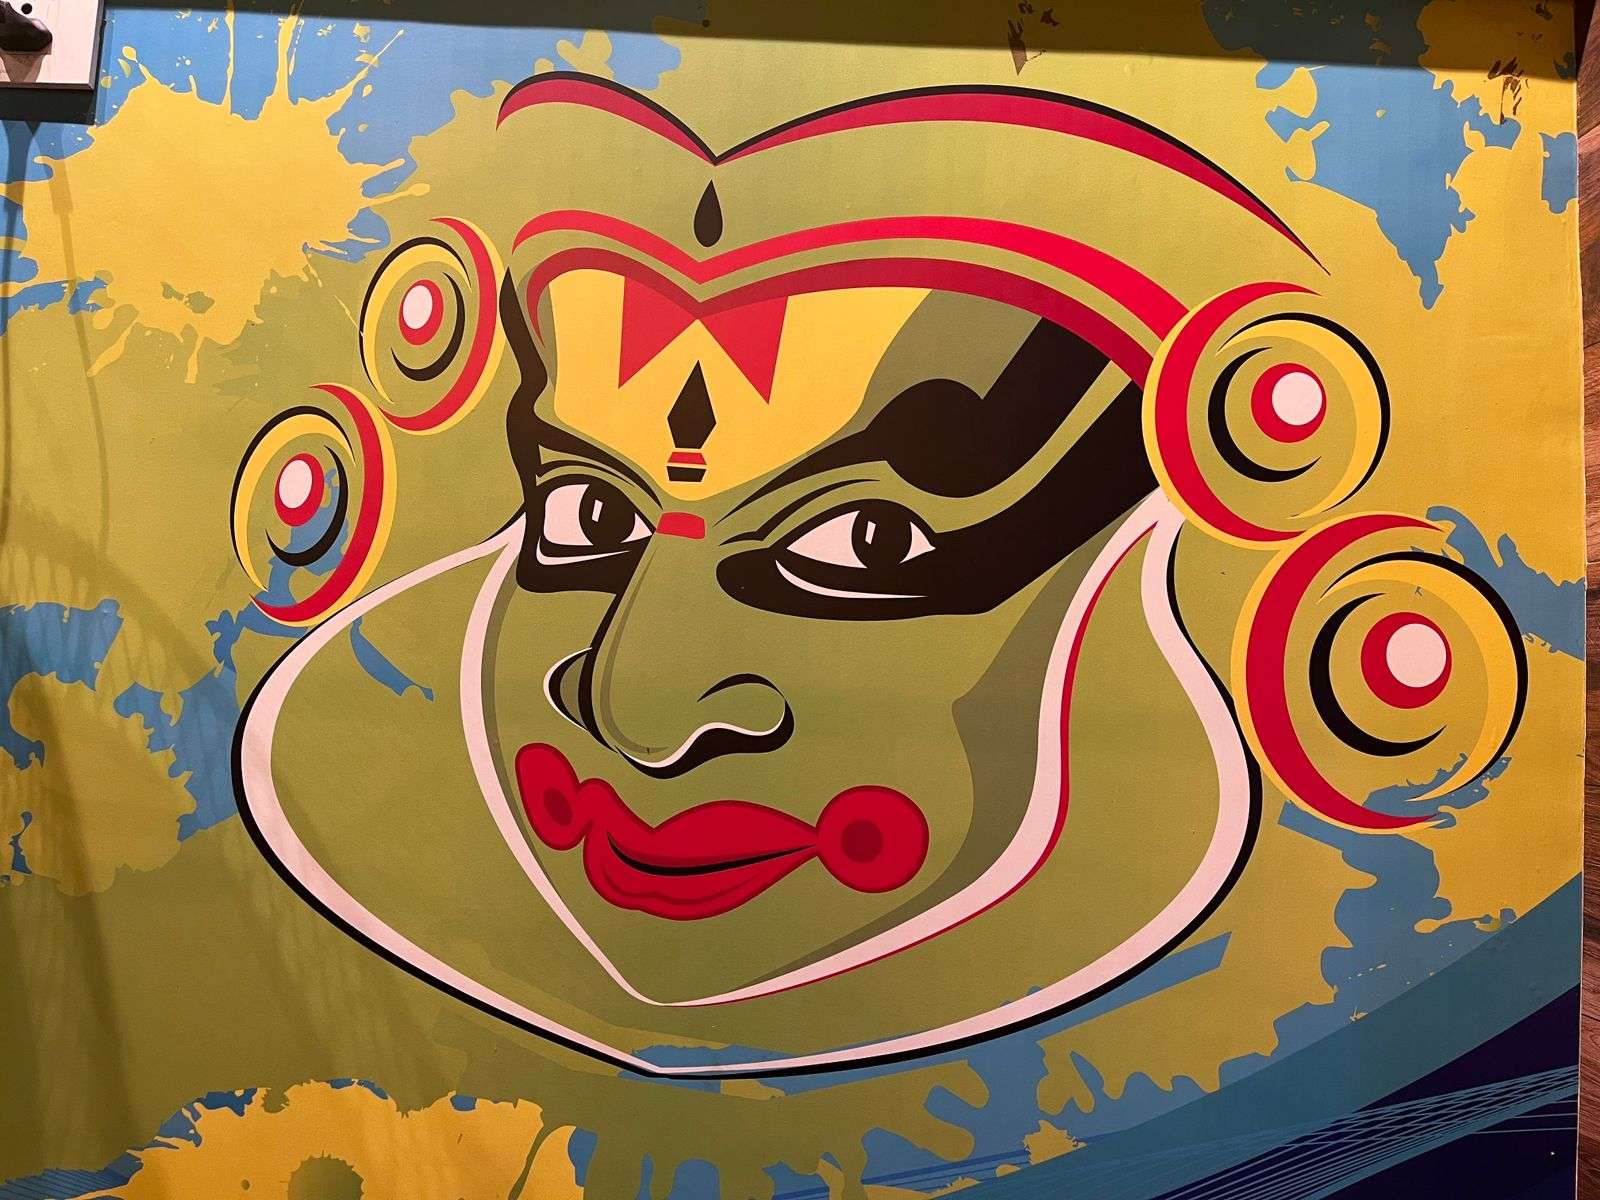 kathakali dancer puzzle online from photo